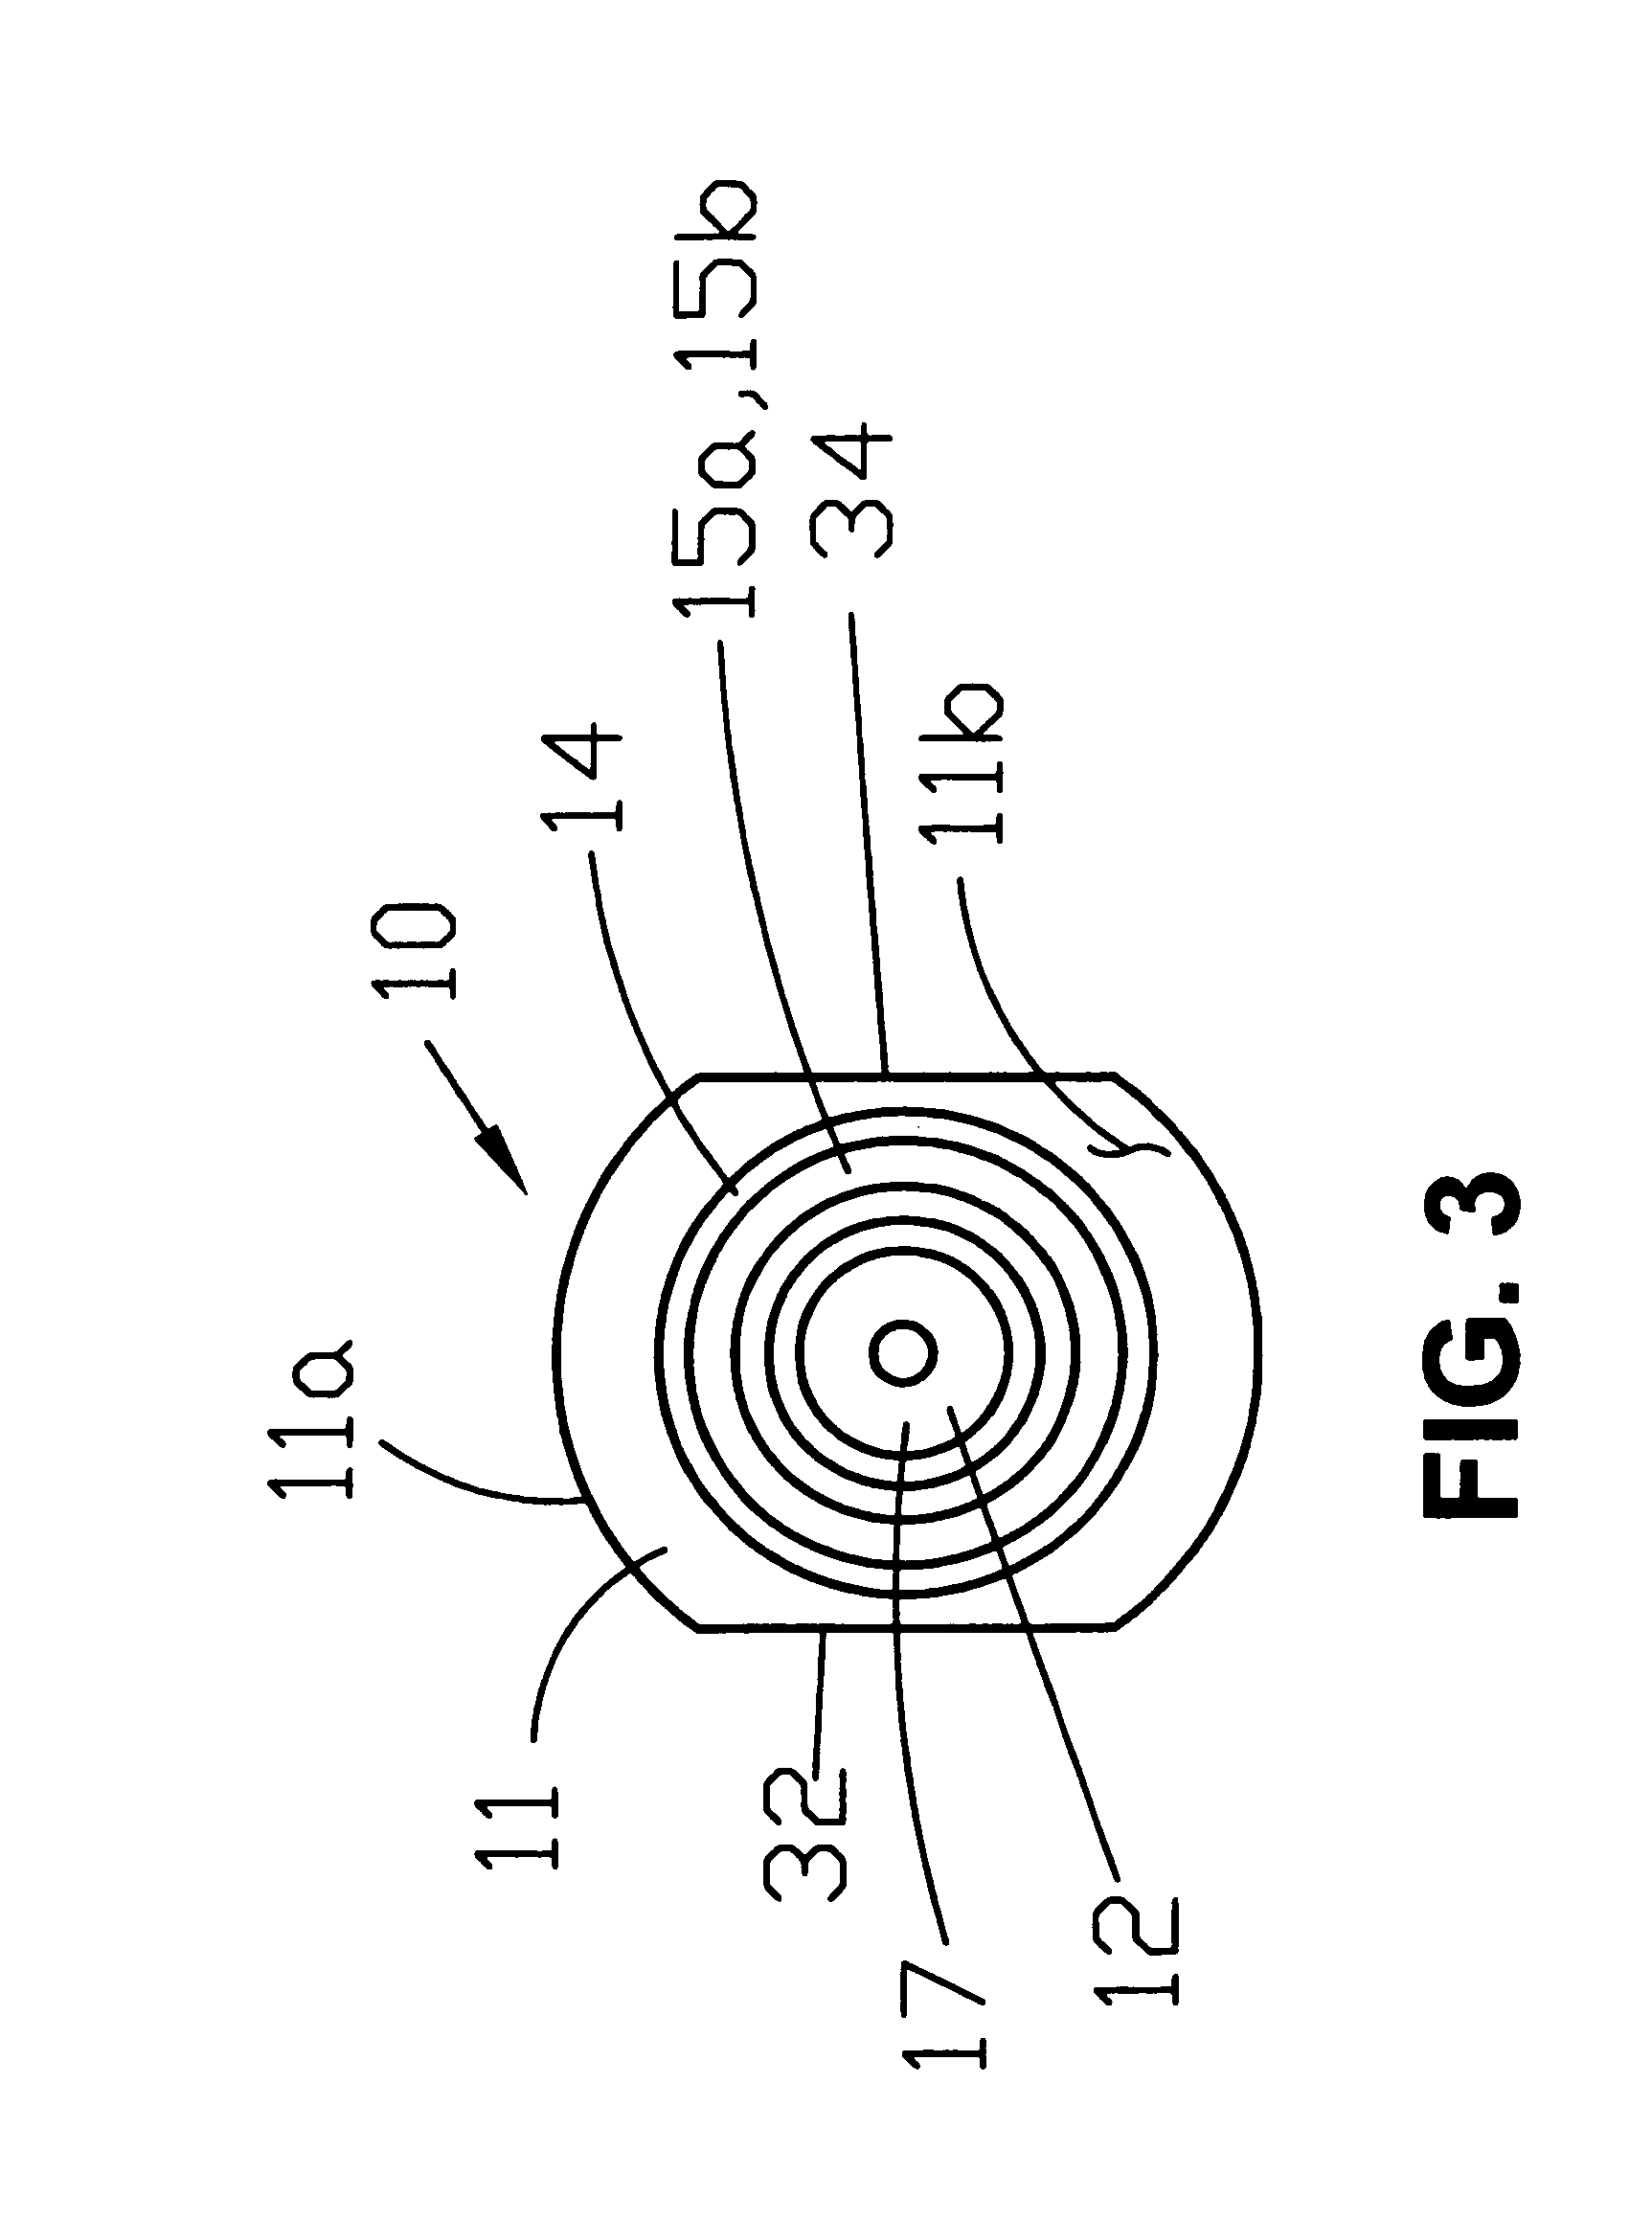 Integrated fastener and sealing system for plumbing fixtures